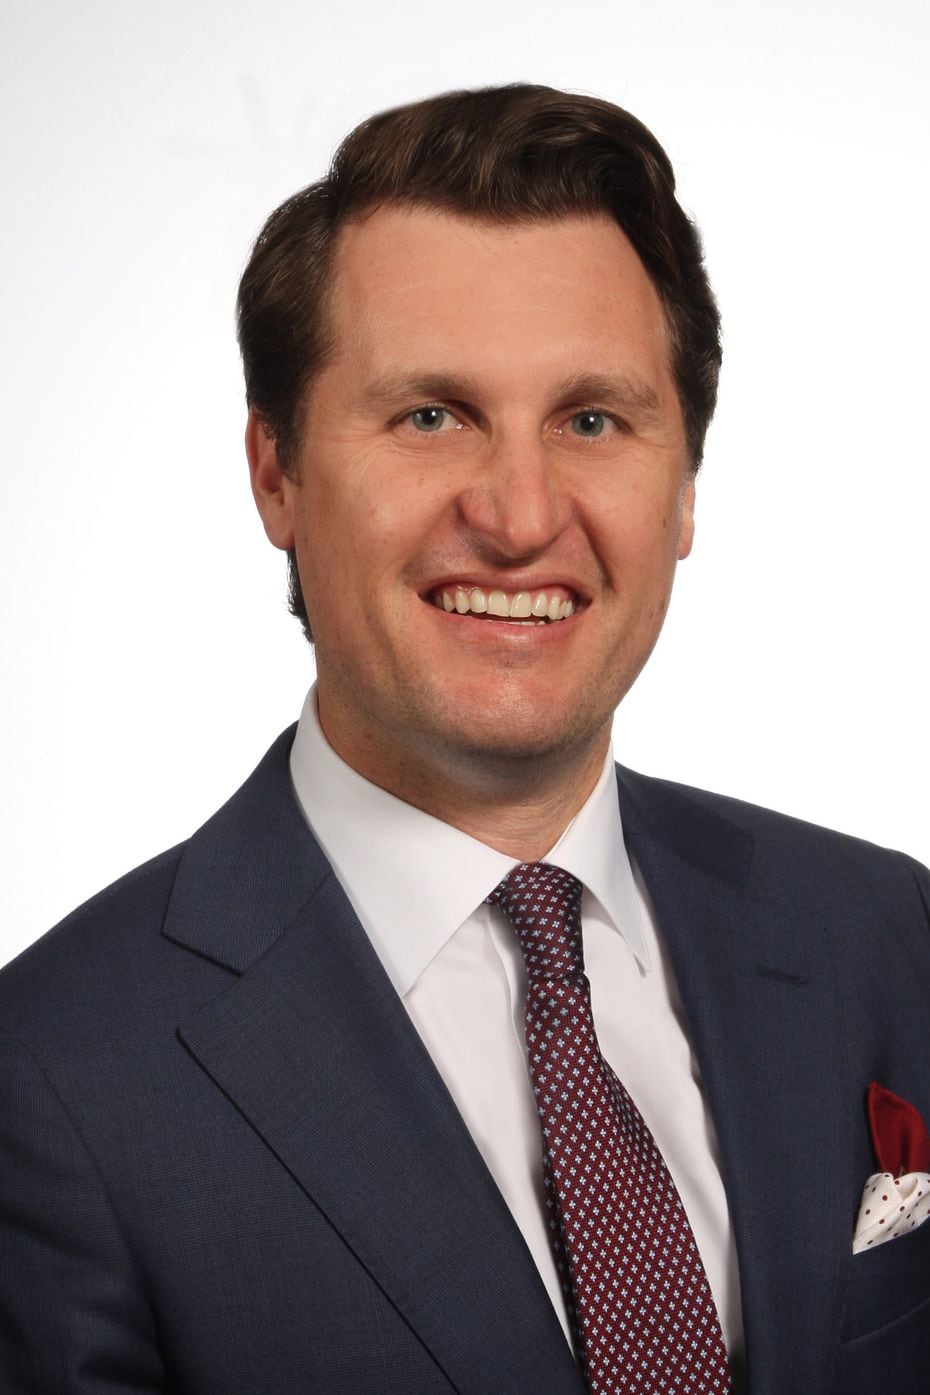 Matthew Rosenfeld, executive vice president and director of D-FW brokerage at Dallas-based Weitzman.